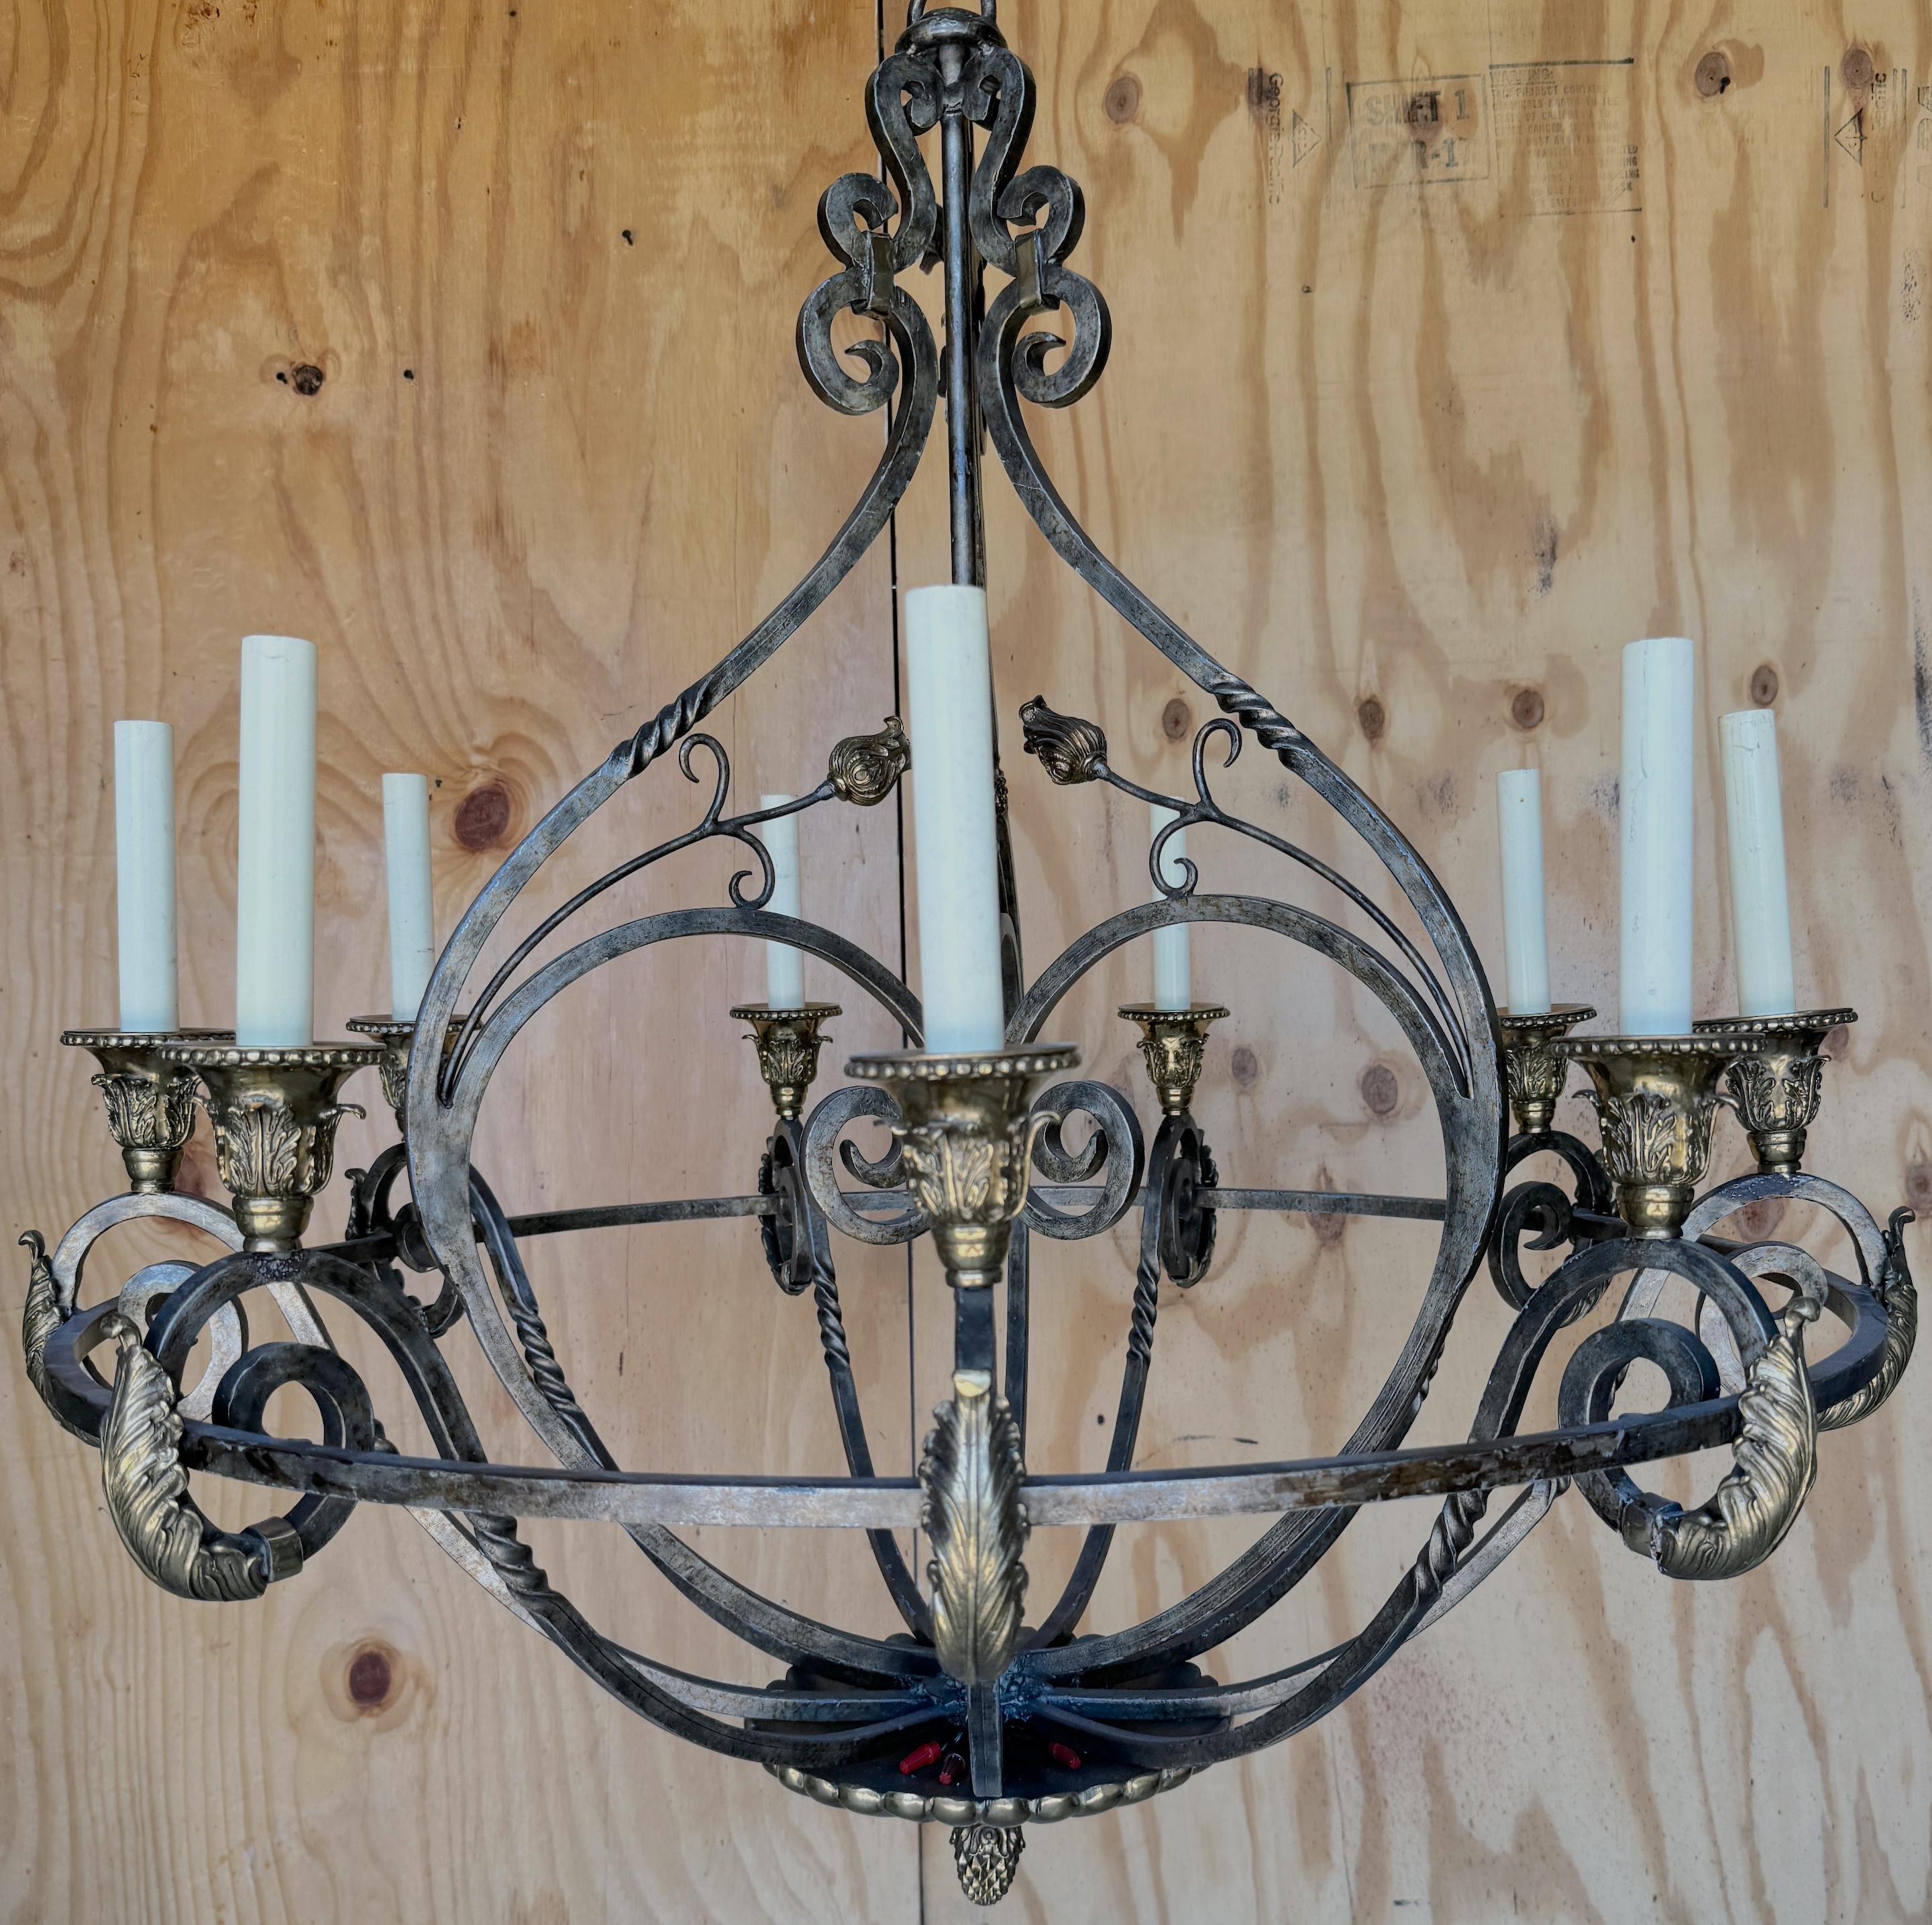 Neoclassical Wrought Iron & Brass 8-Light Chandelier, by Maitland Smith
An exquisite Neoclassical Wrought Iron & Brass 8-Light Chandelier, made by Maitland Smith. The chandelier  has a tailored circular design, measuring 42 inches in diameter and